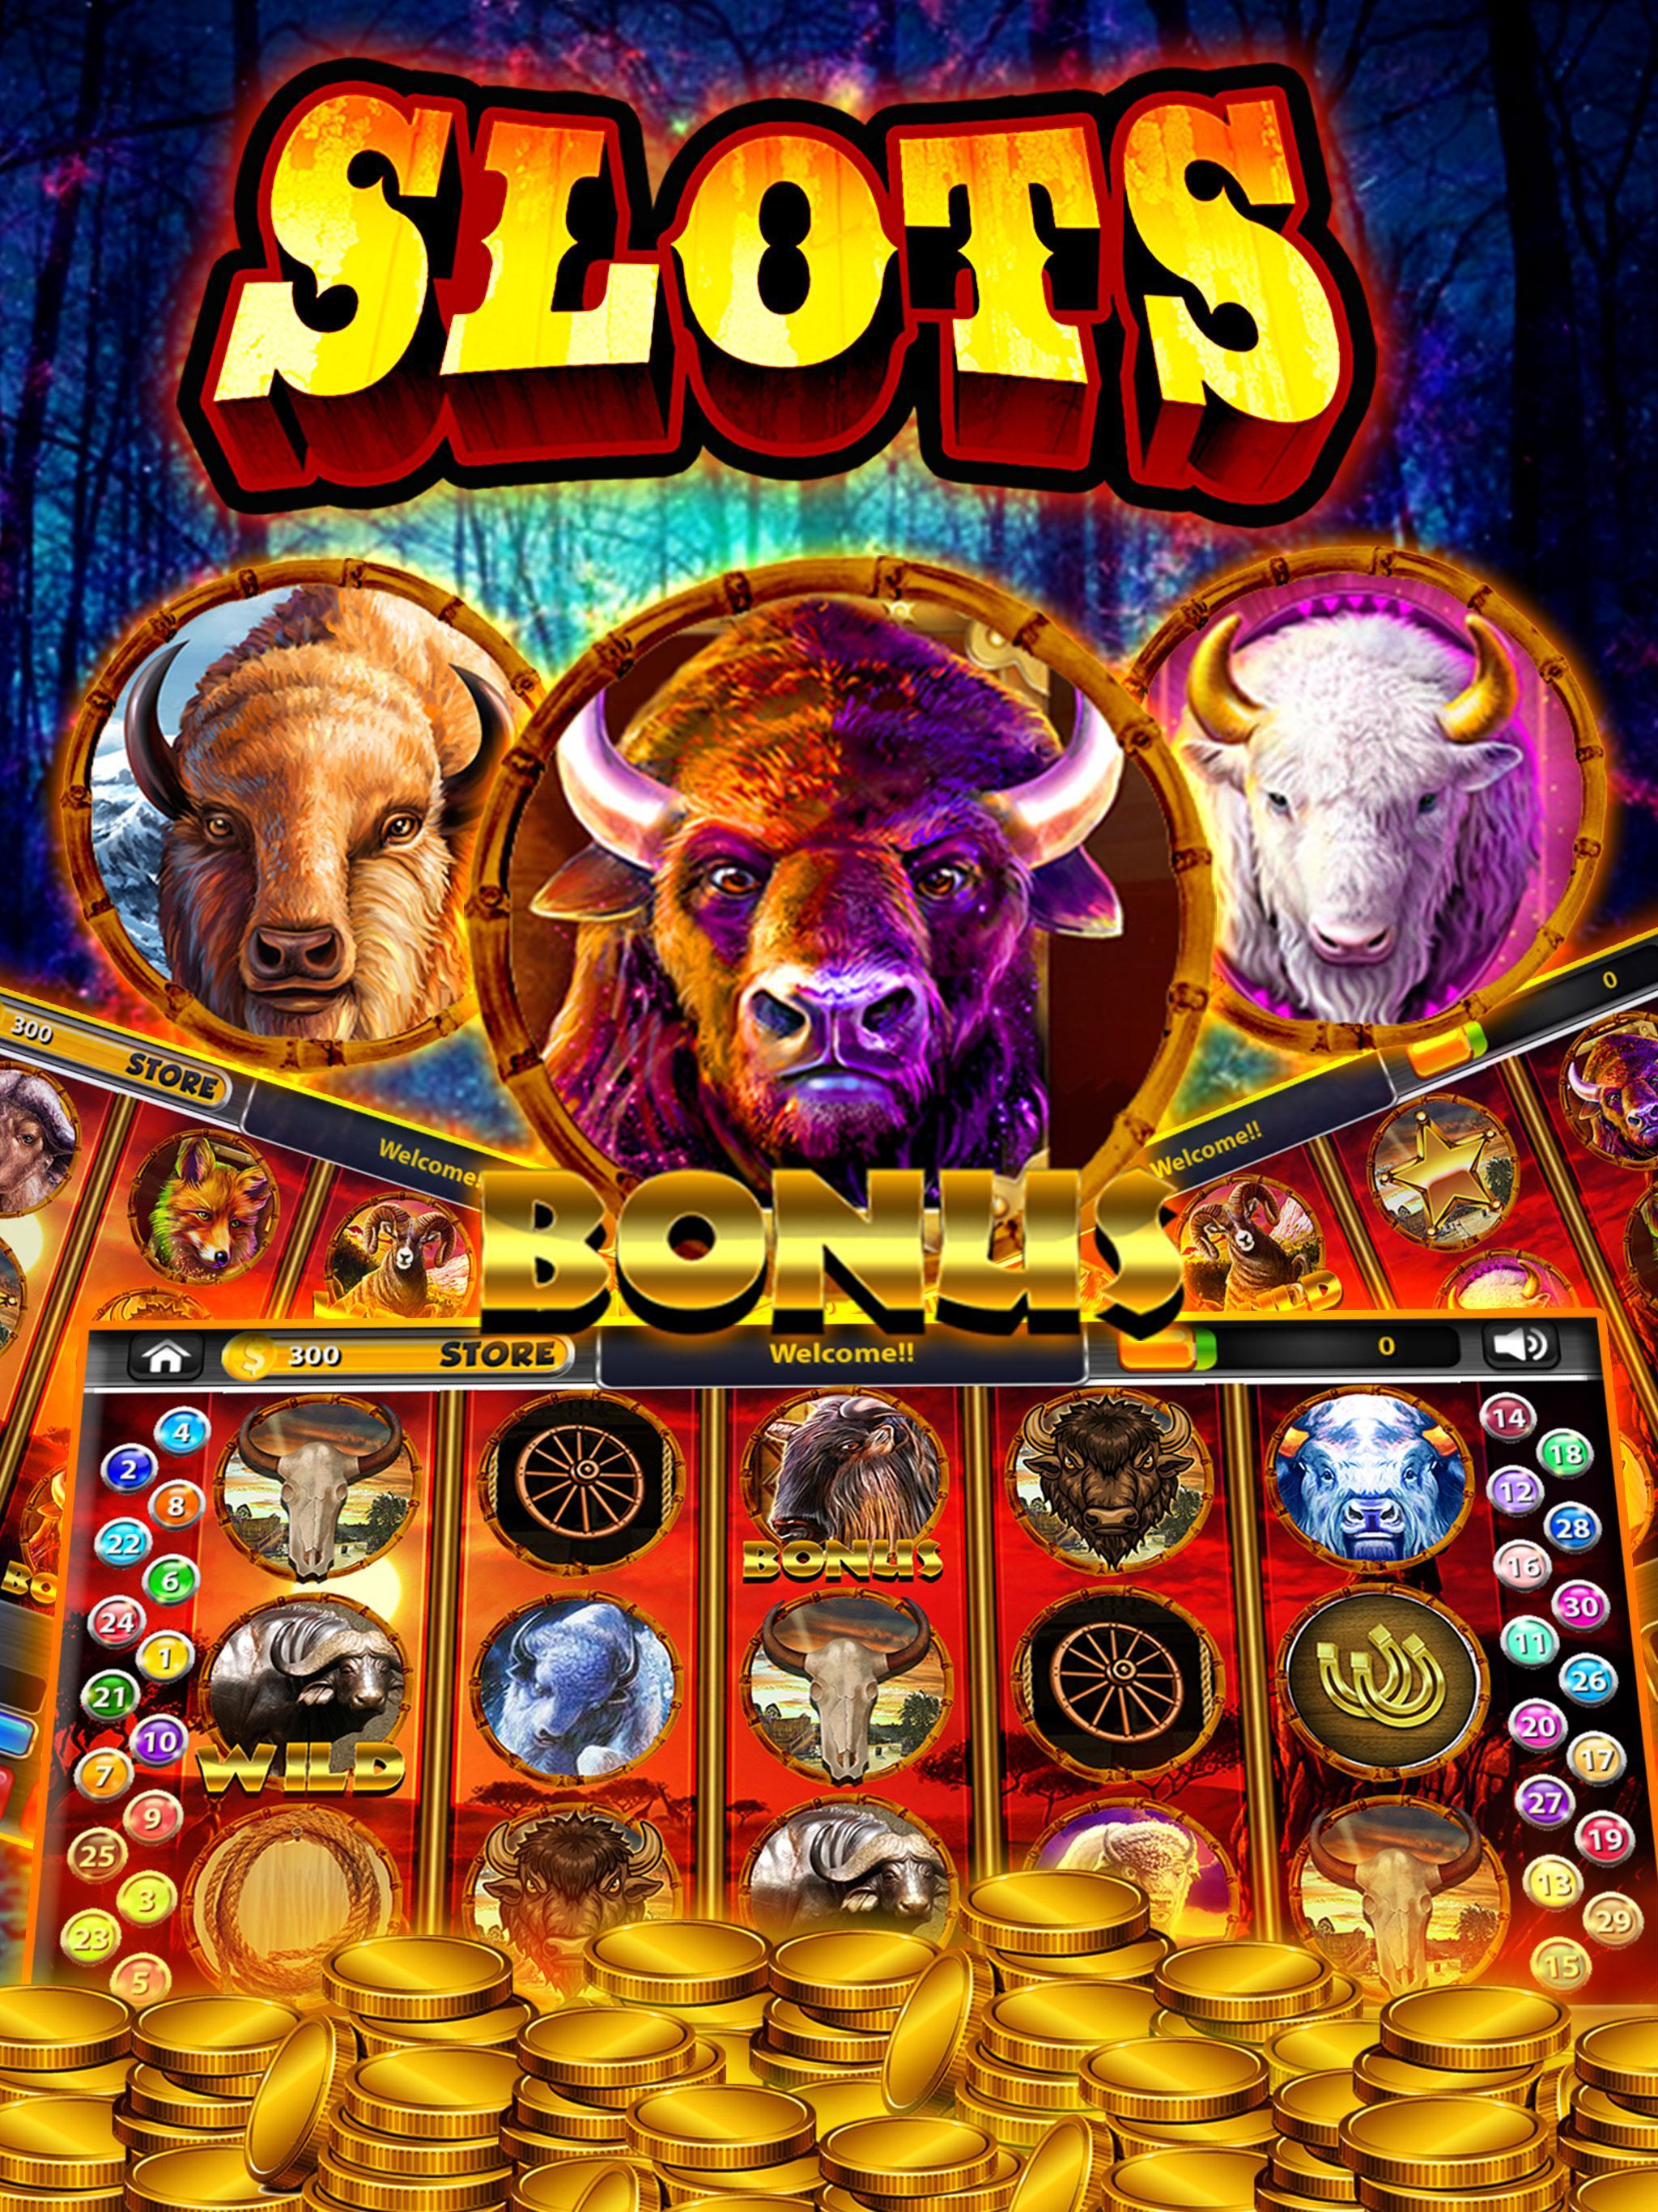 Buffalo Slots for Android - APK Download